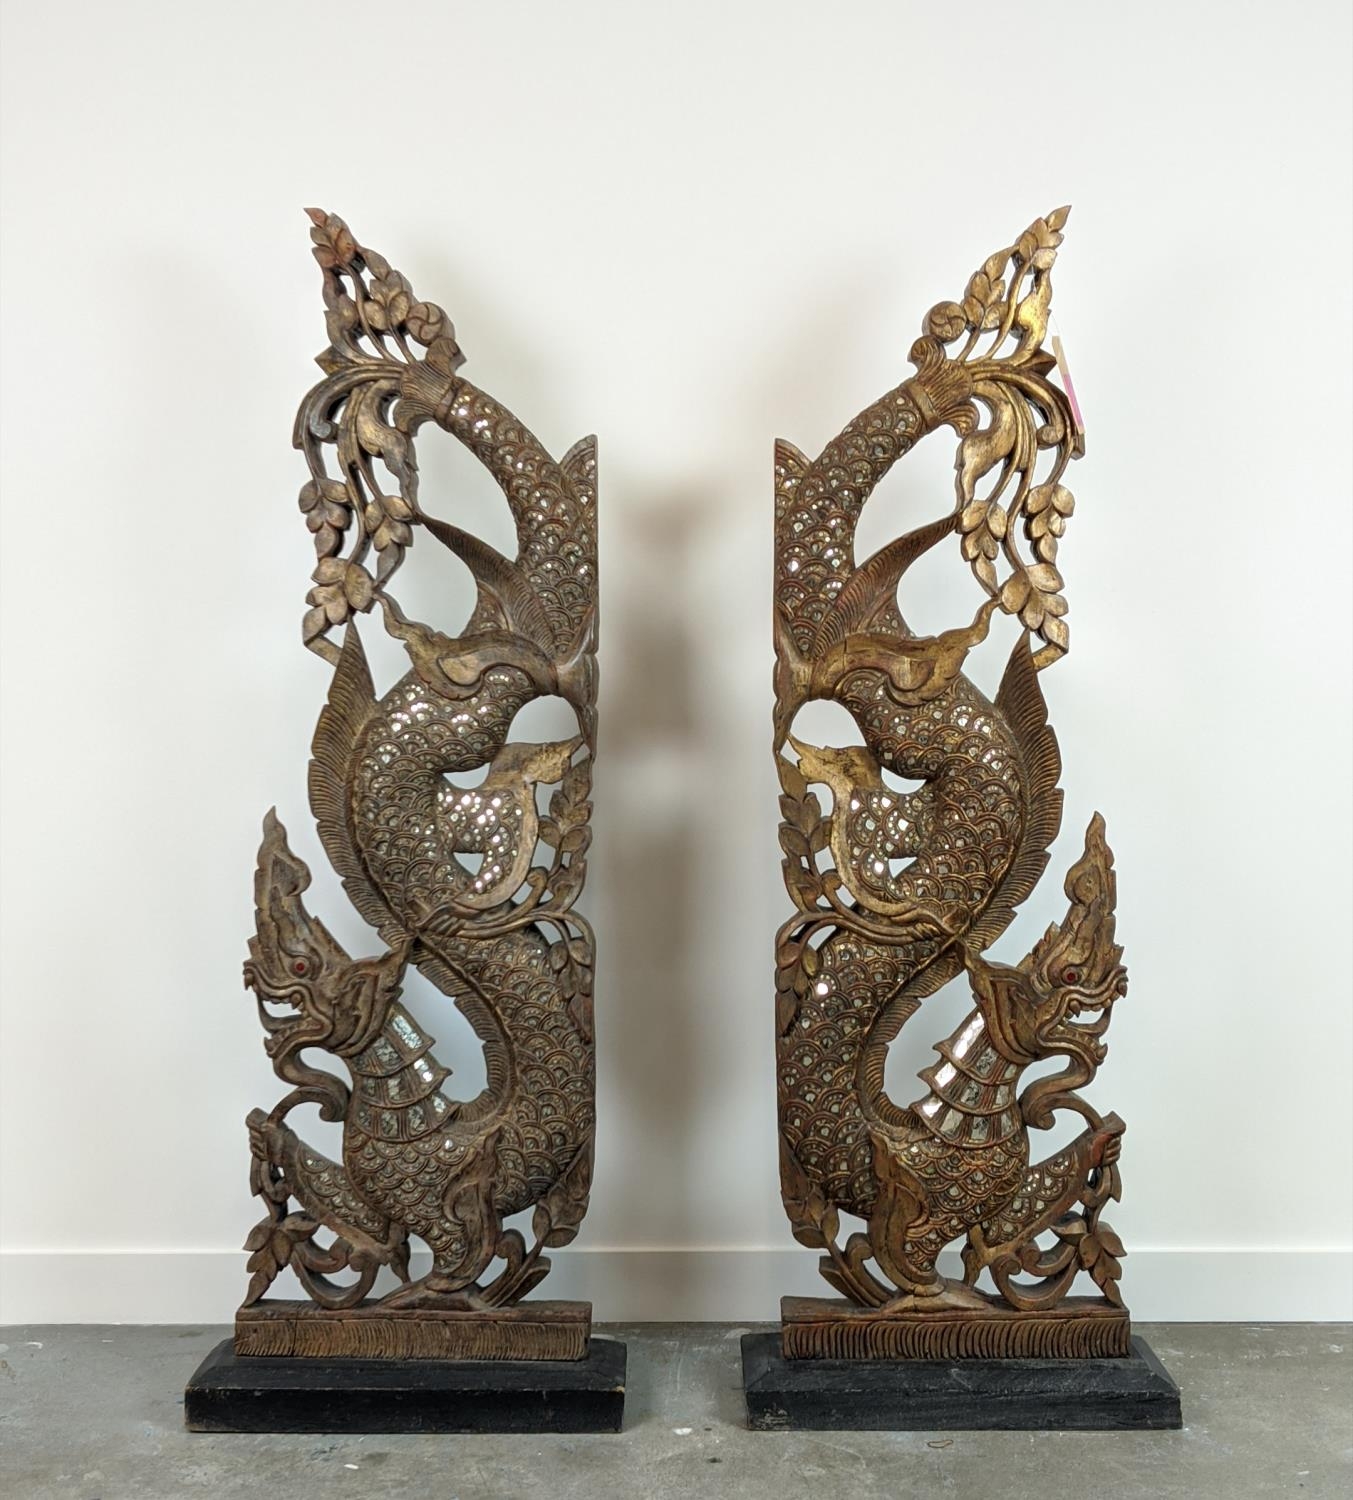 THAI NAGA TEMPLE GUARDIANS, carved wood in gilt and applied mirrored finish, 167cm H x 62cm W. (2)